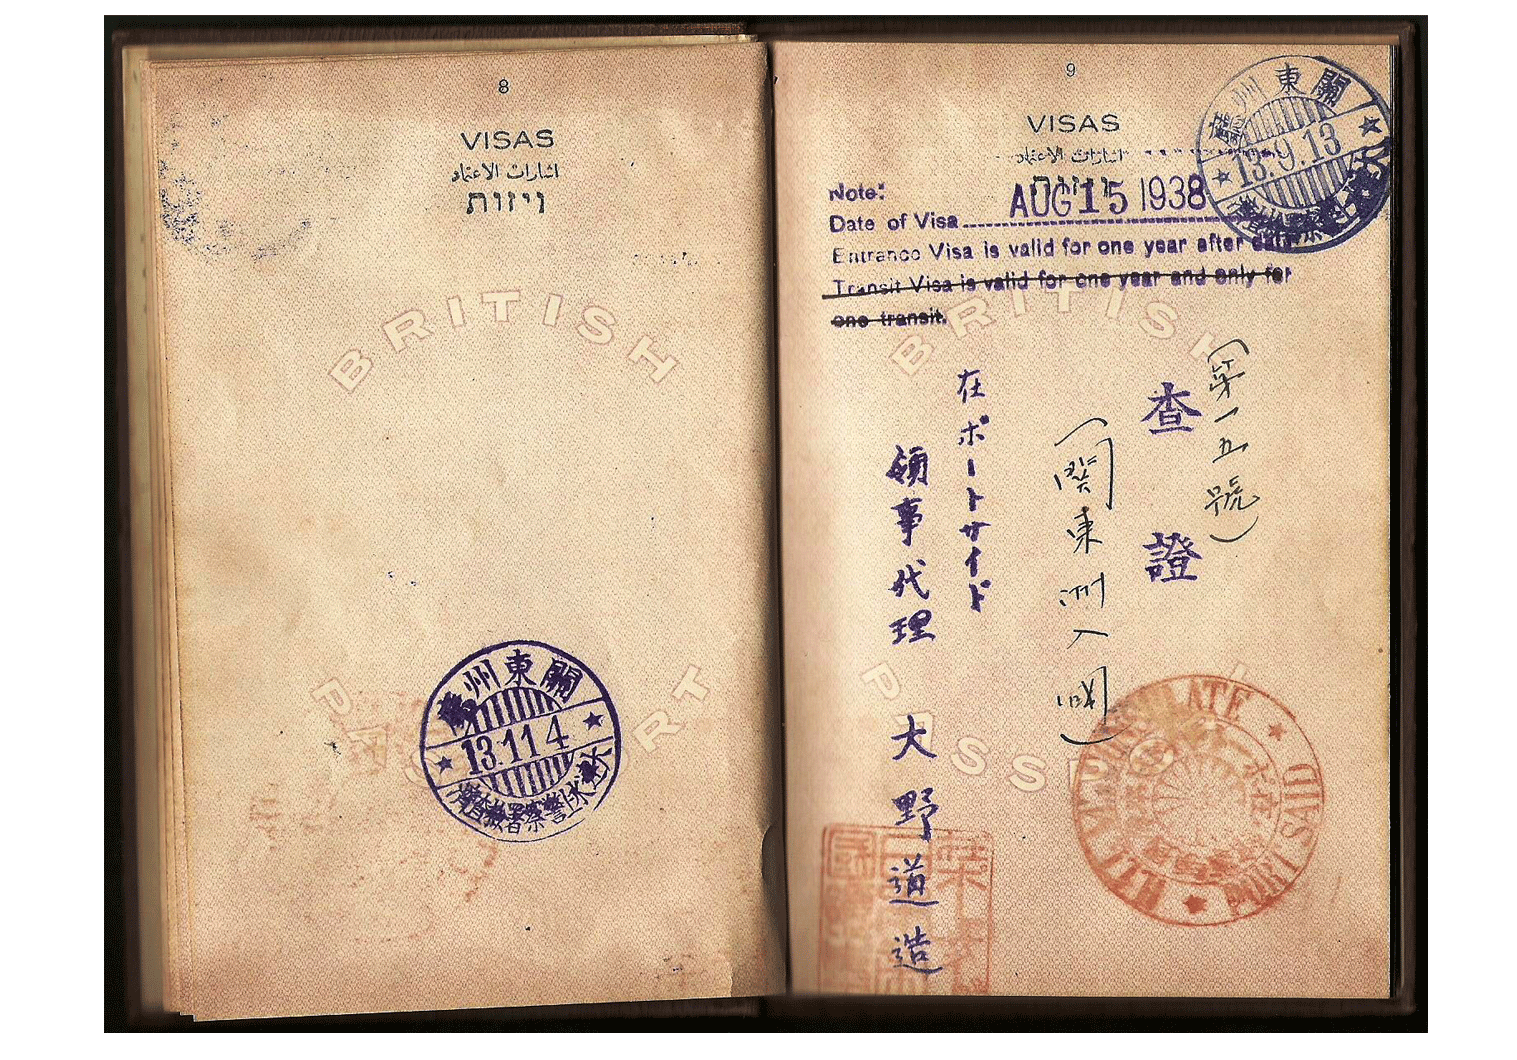 Going to Manchuria in 1938